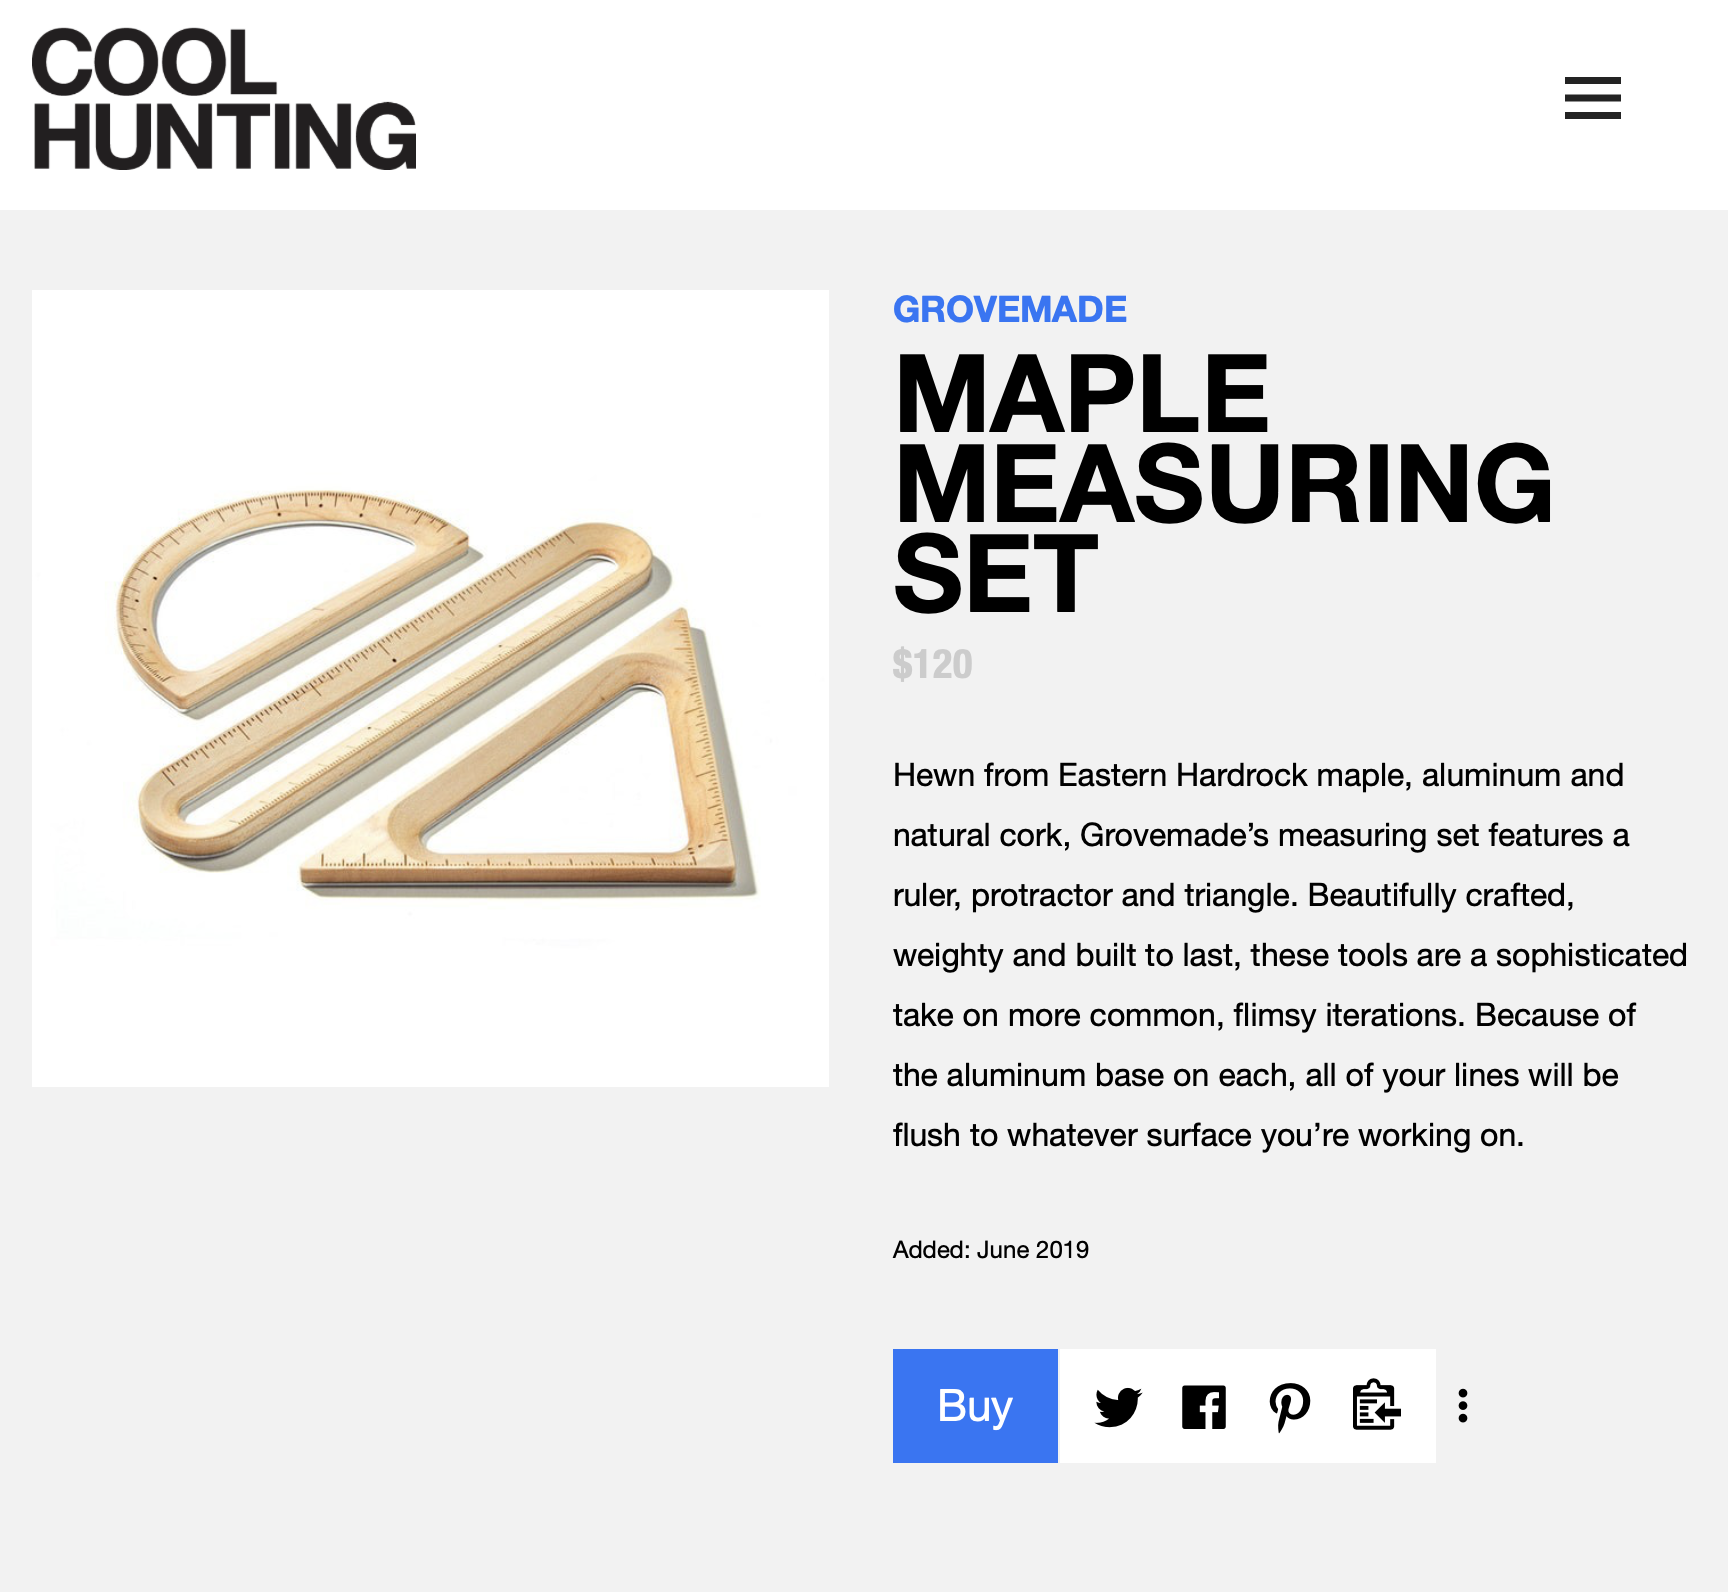 cool hunting features grovemade measuring kit